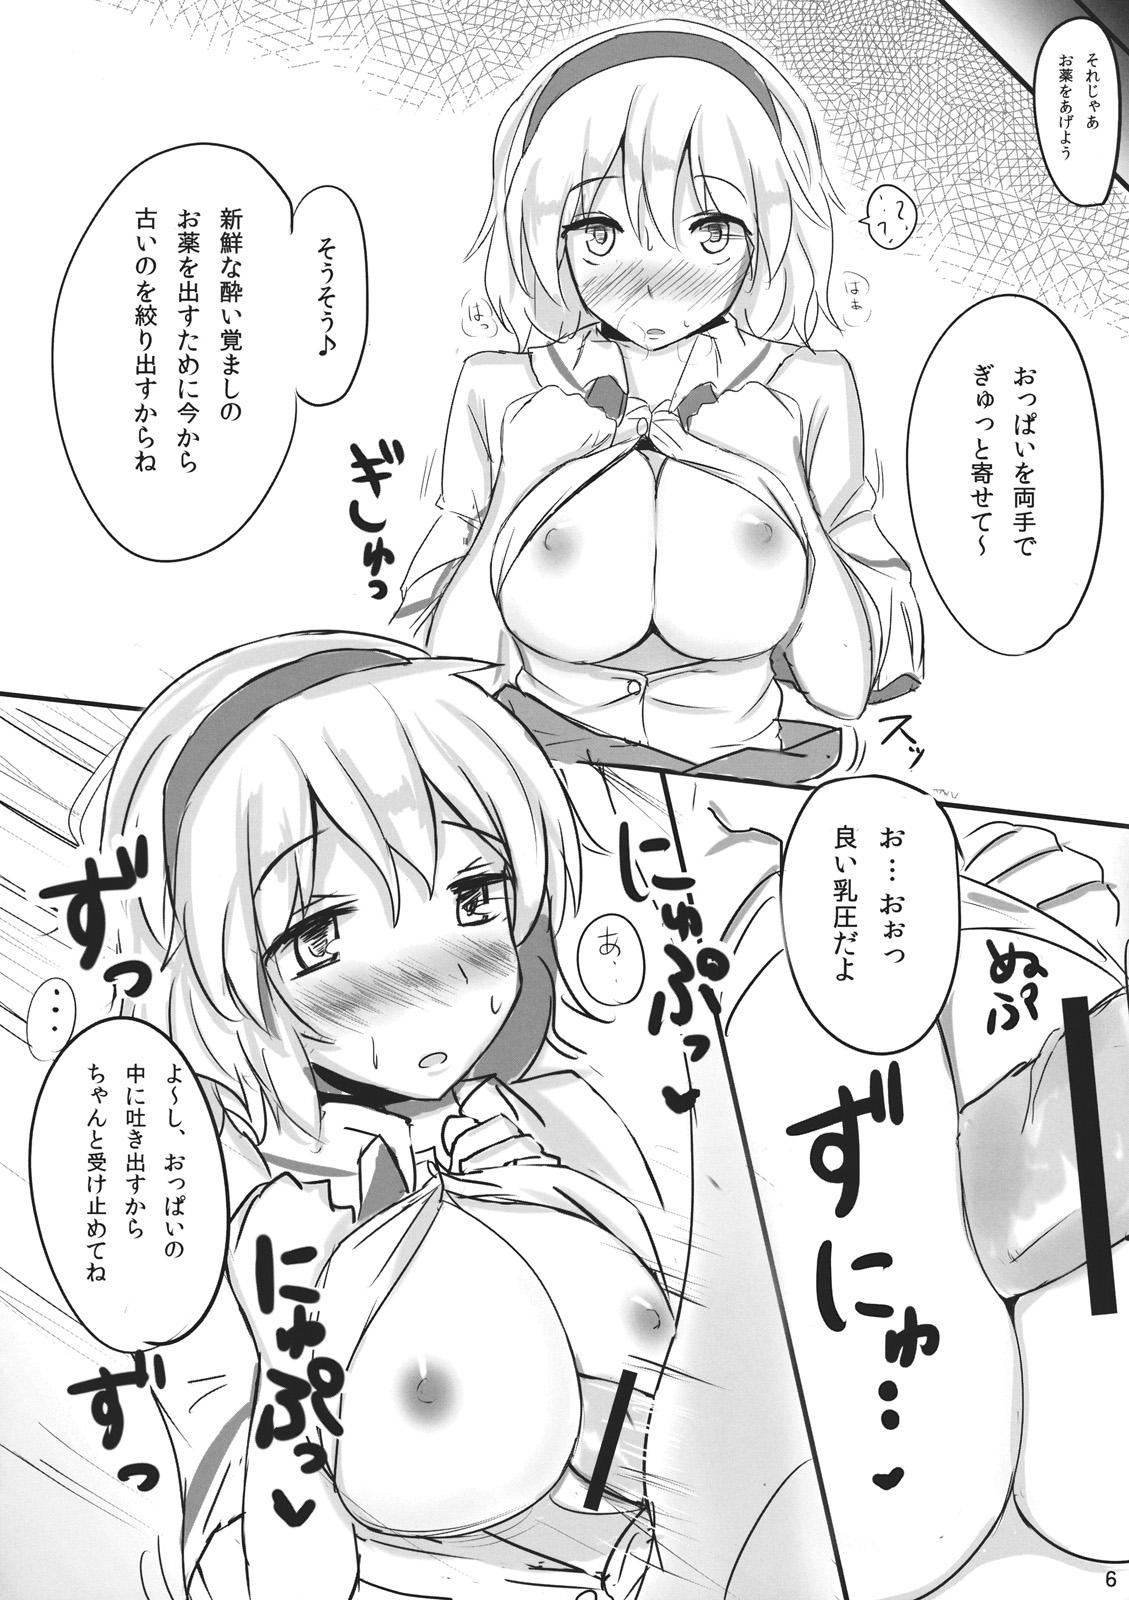 18 Year Old Porn Nanairo Syndrome - Touhou project Cbt - Page 6